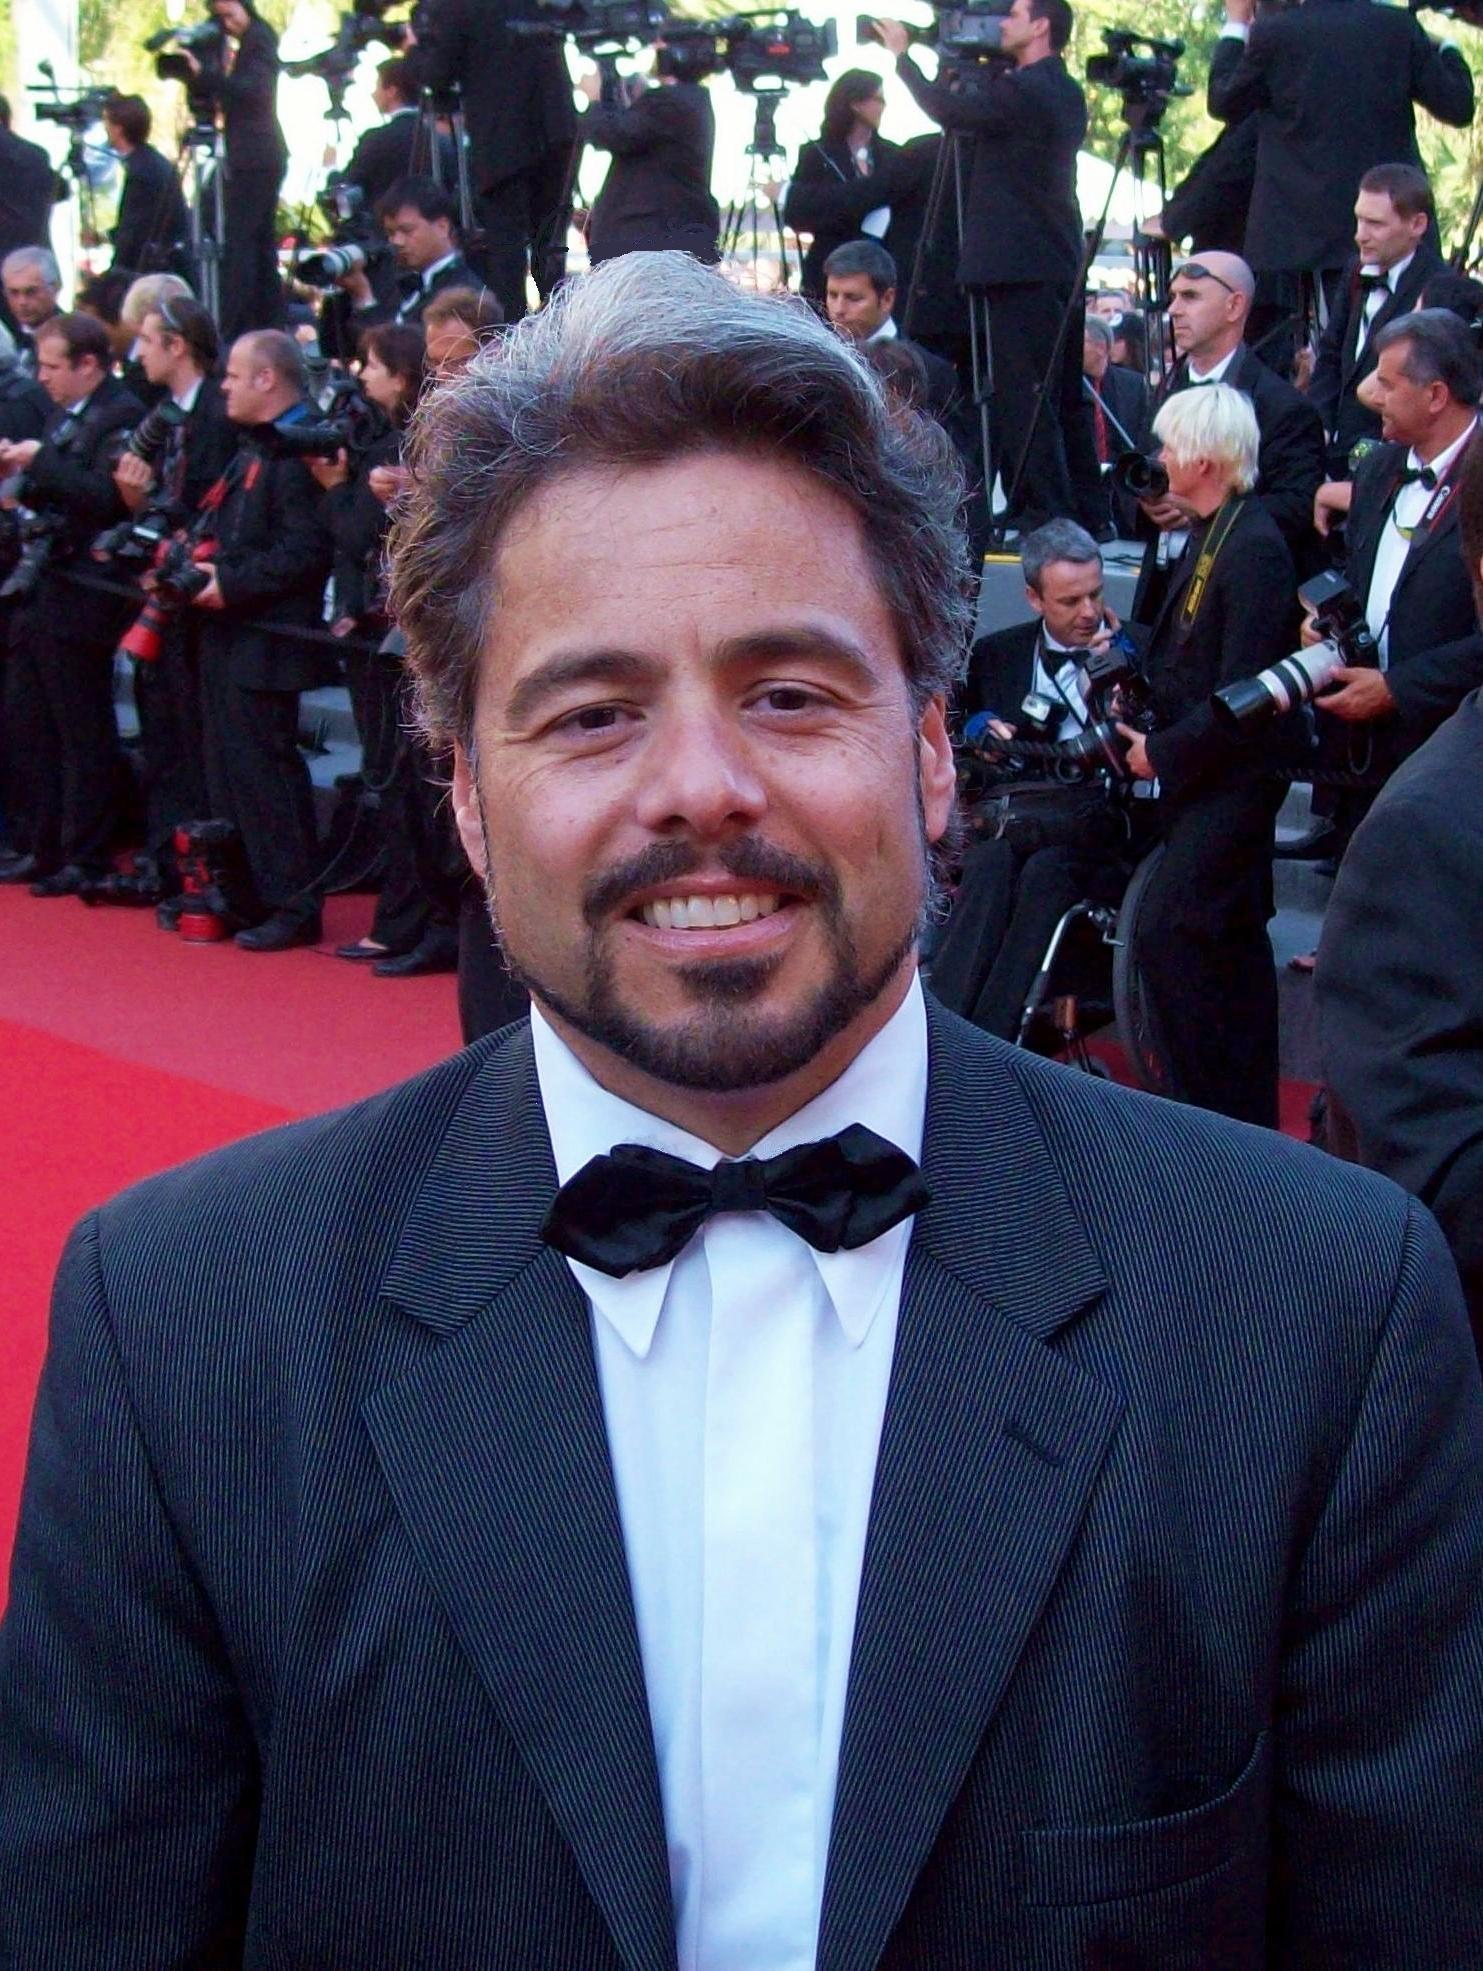 Cannes Award Ceremony 2010 - Michael A. Calace